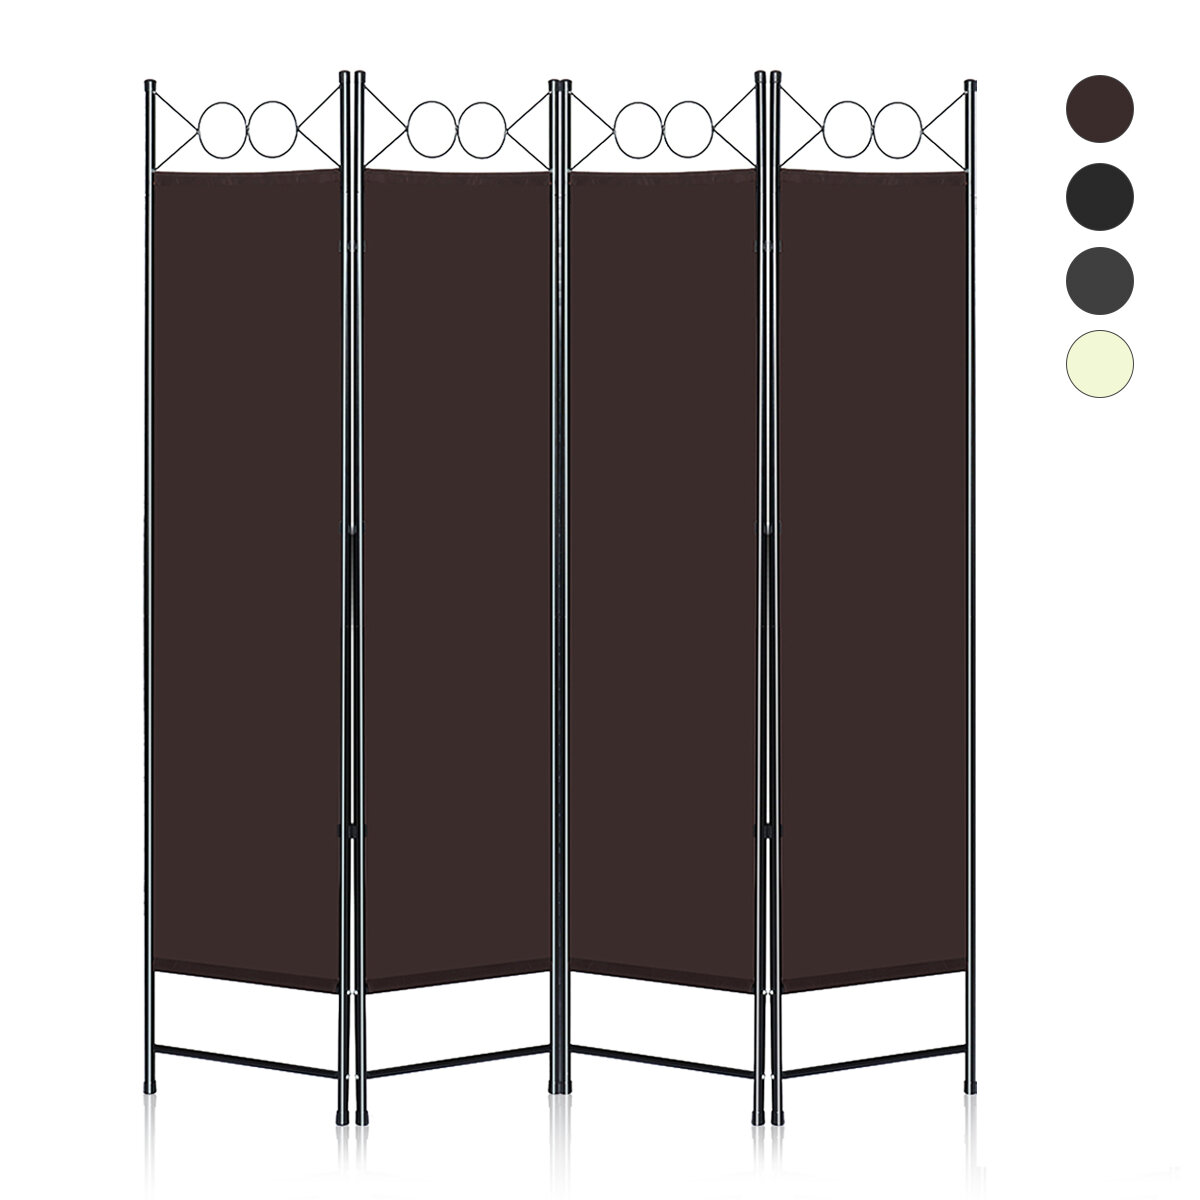 Image of Snailhome 6ft 4-Panel Vintage Home Folding Room Divider Screen Partition Separator Privace Screen